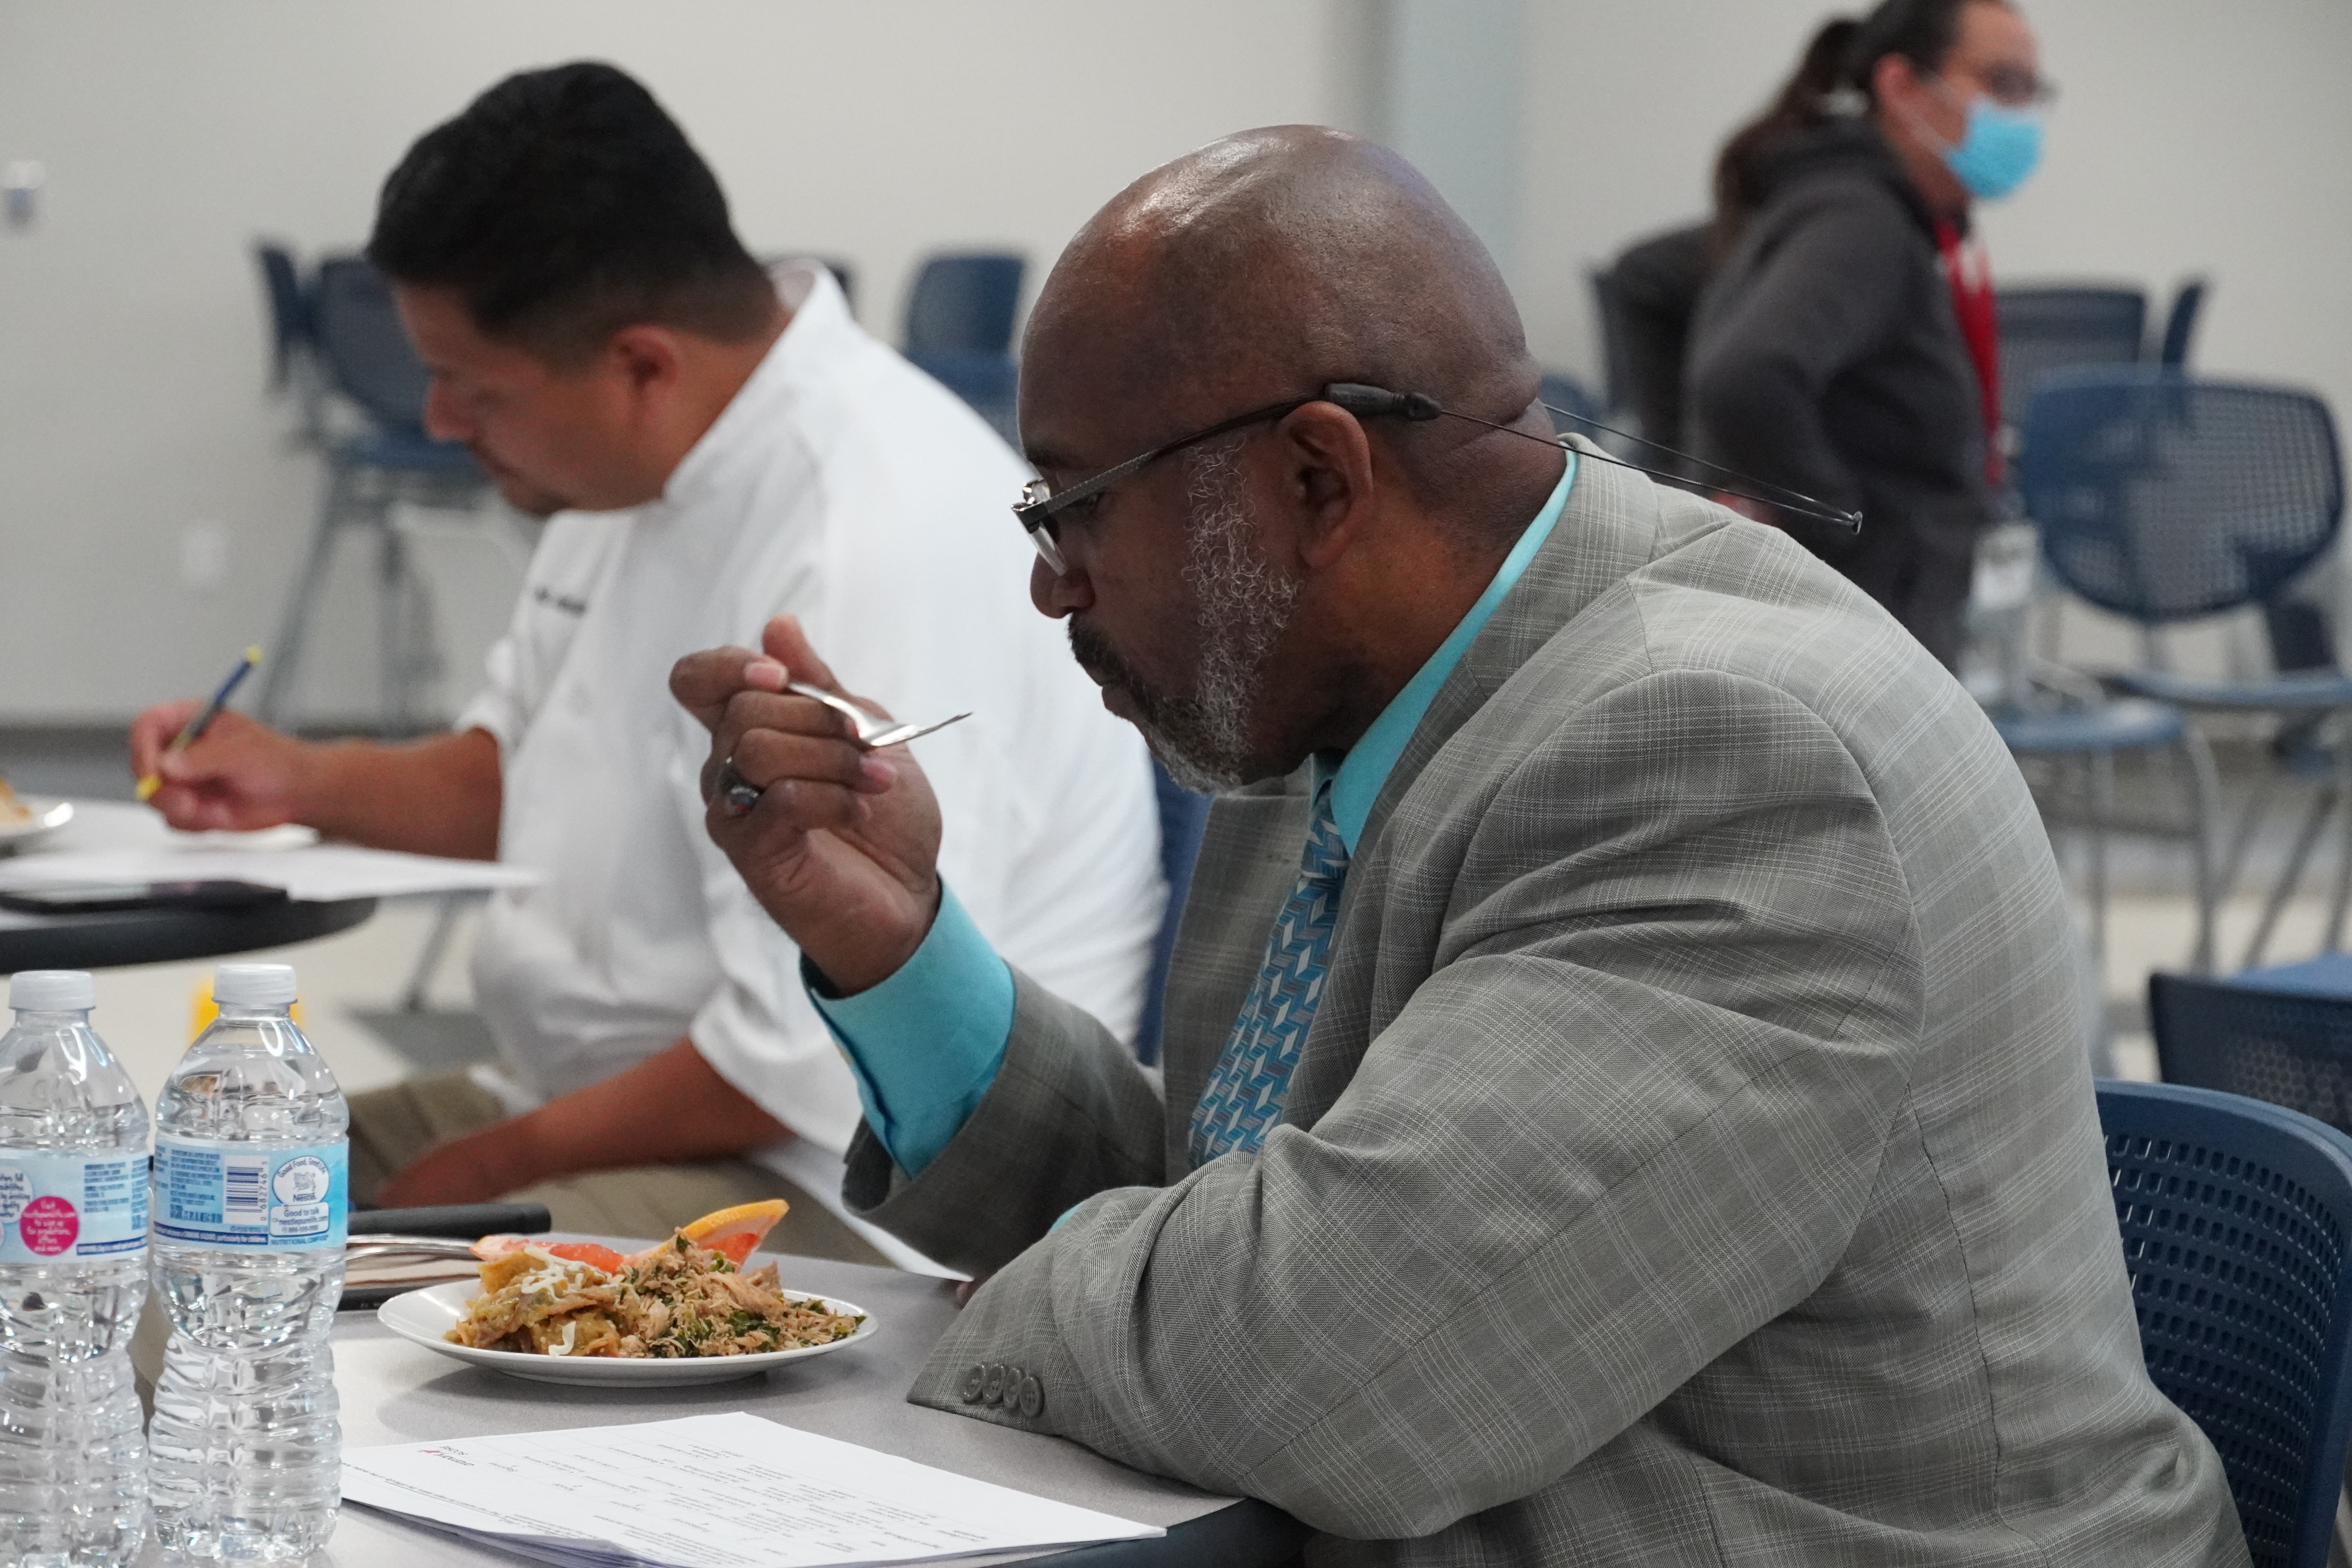 Dr. Anthony Price tastes food for judging